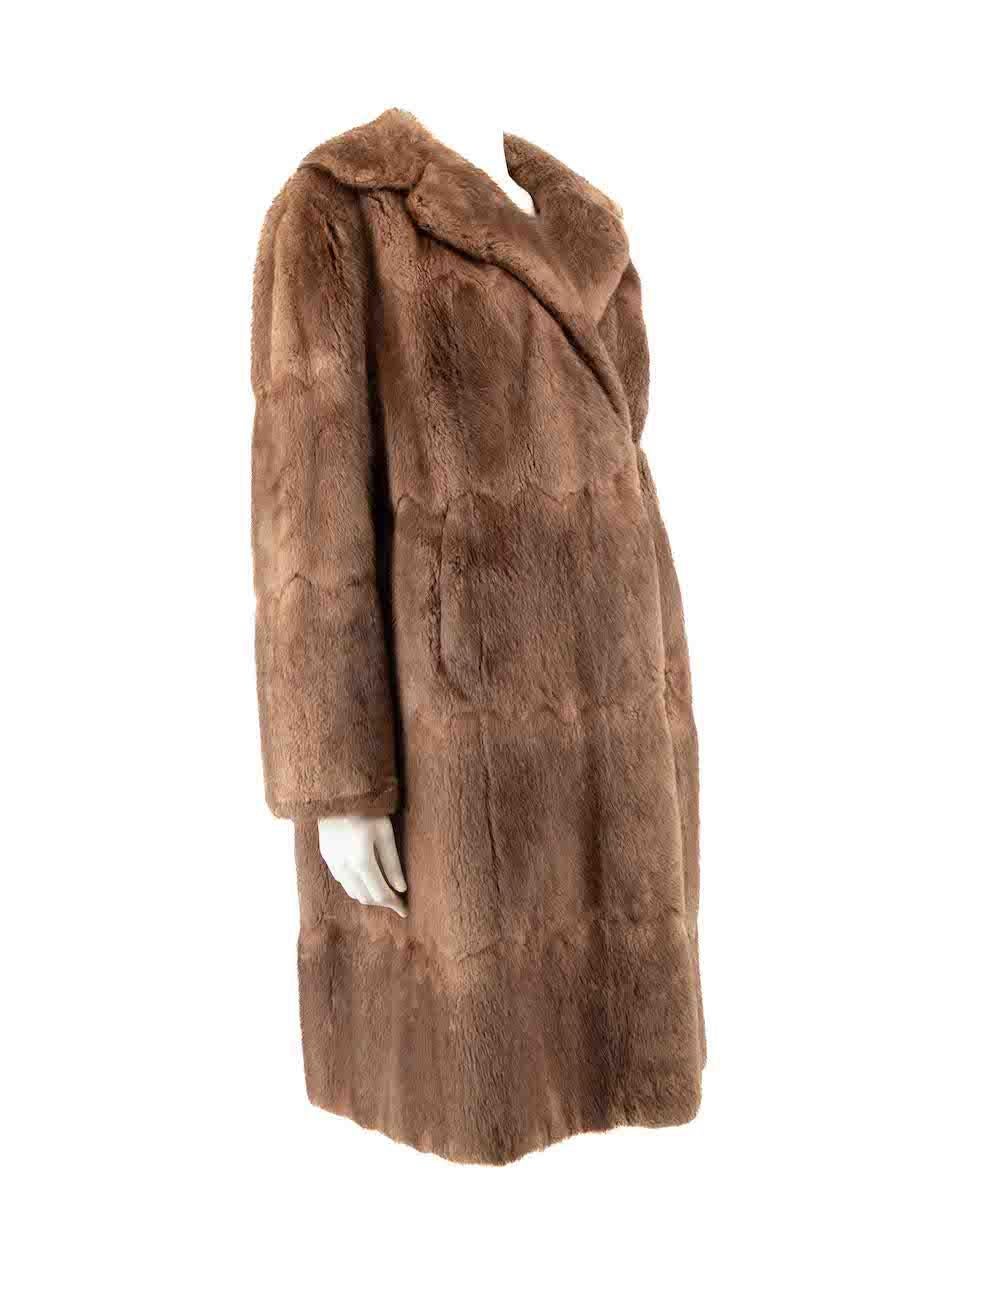 CONDITION is Good. General wear to coat is evident. Moderate signs of wear to front right sleeve and rear left sleeve where fur panel has come off as well as stitching is loosened. The lining seam of both sleeves are partly unstitched. There's small